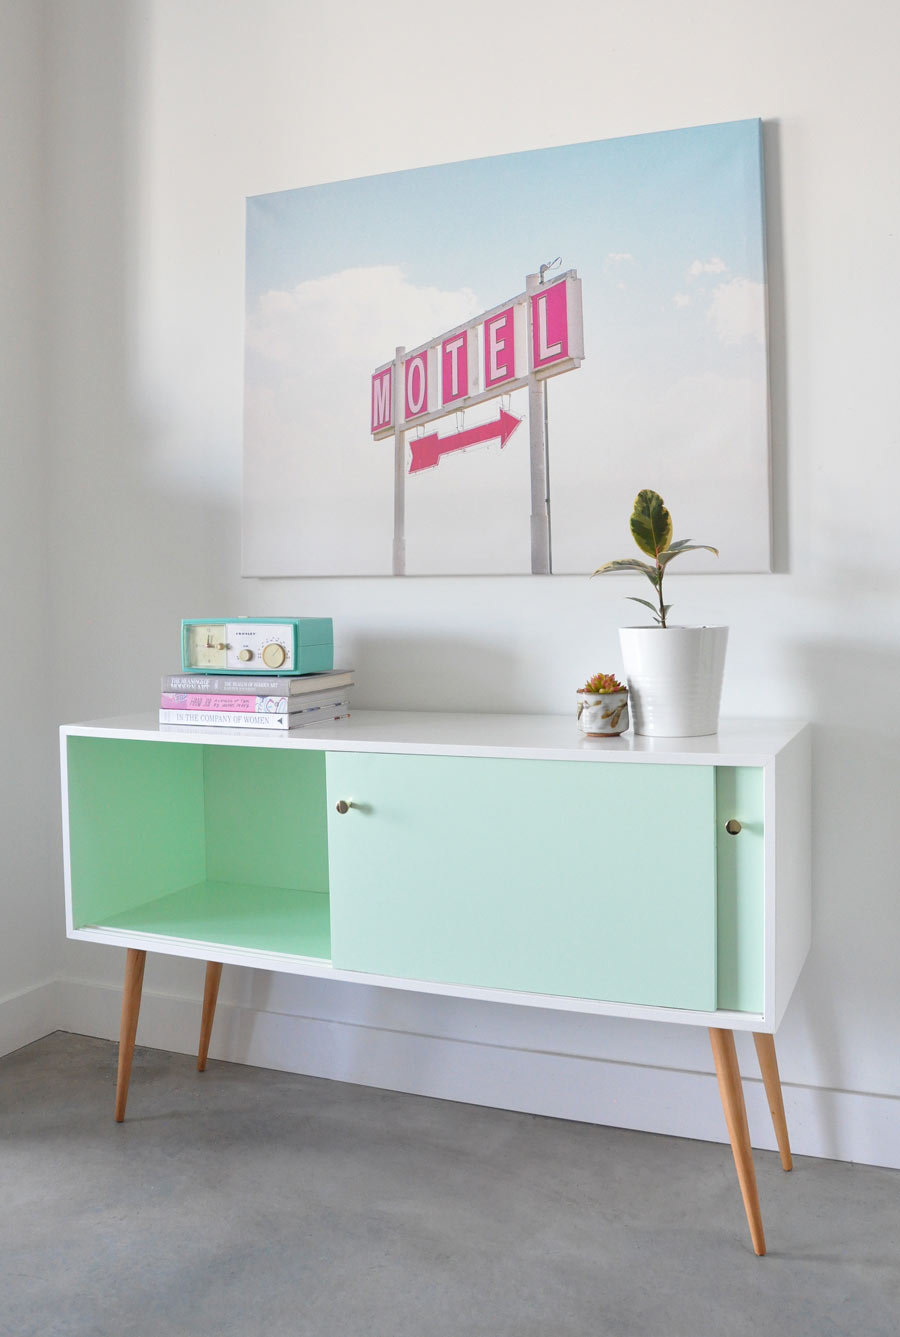 Vintage mid-century modern console before and after by @visualheart